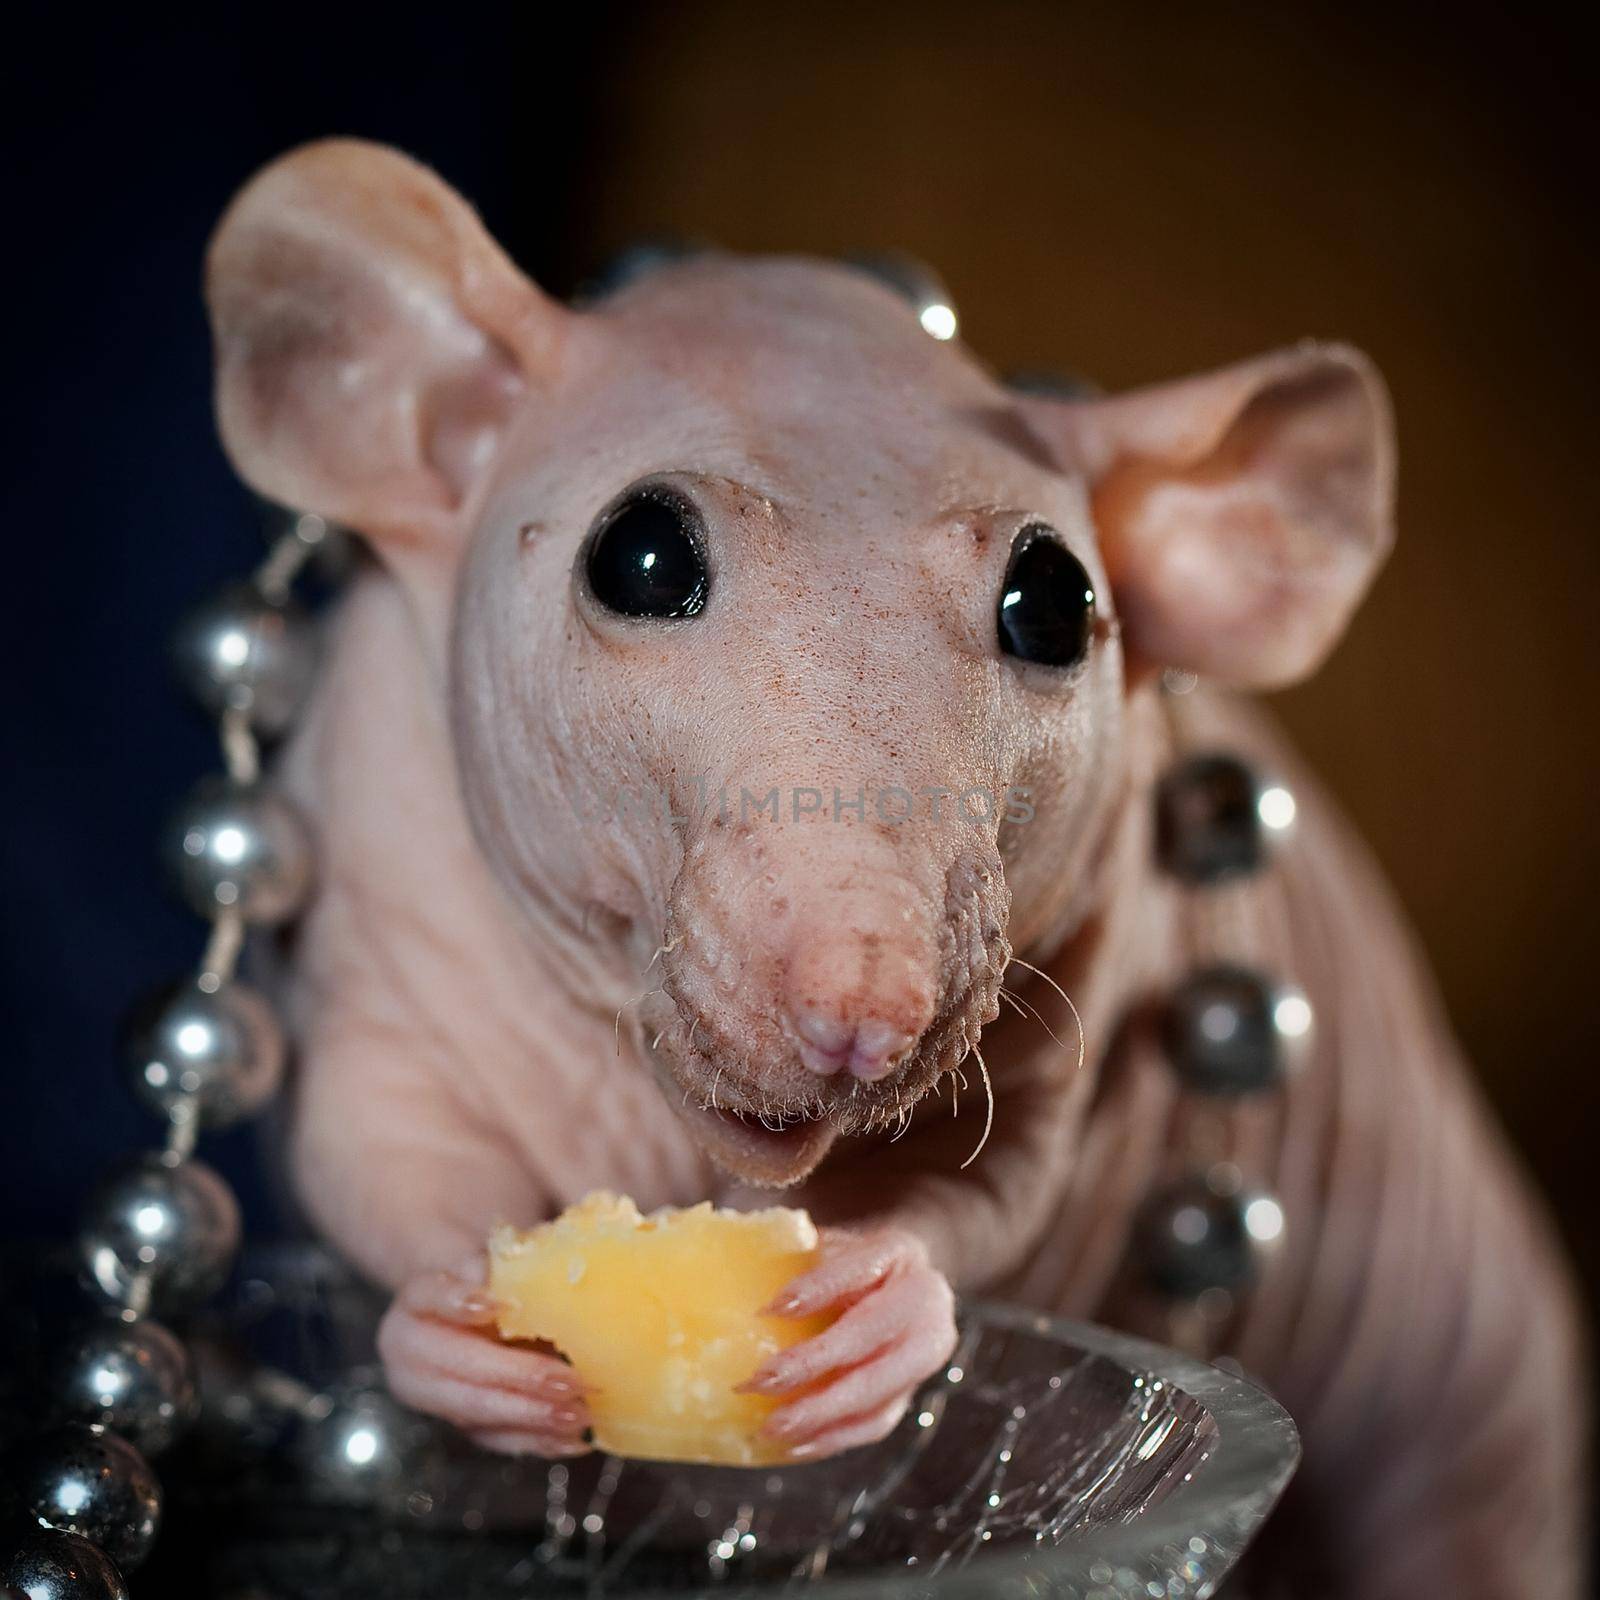 Hairless rat with beads and cheese by Lincikas